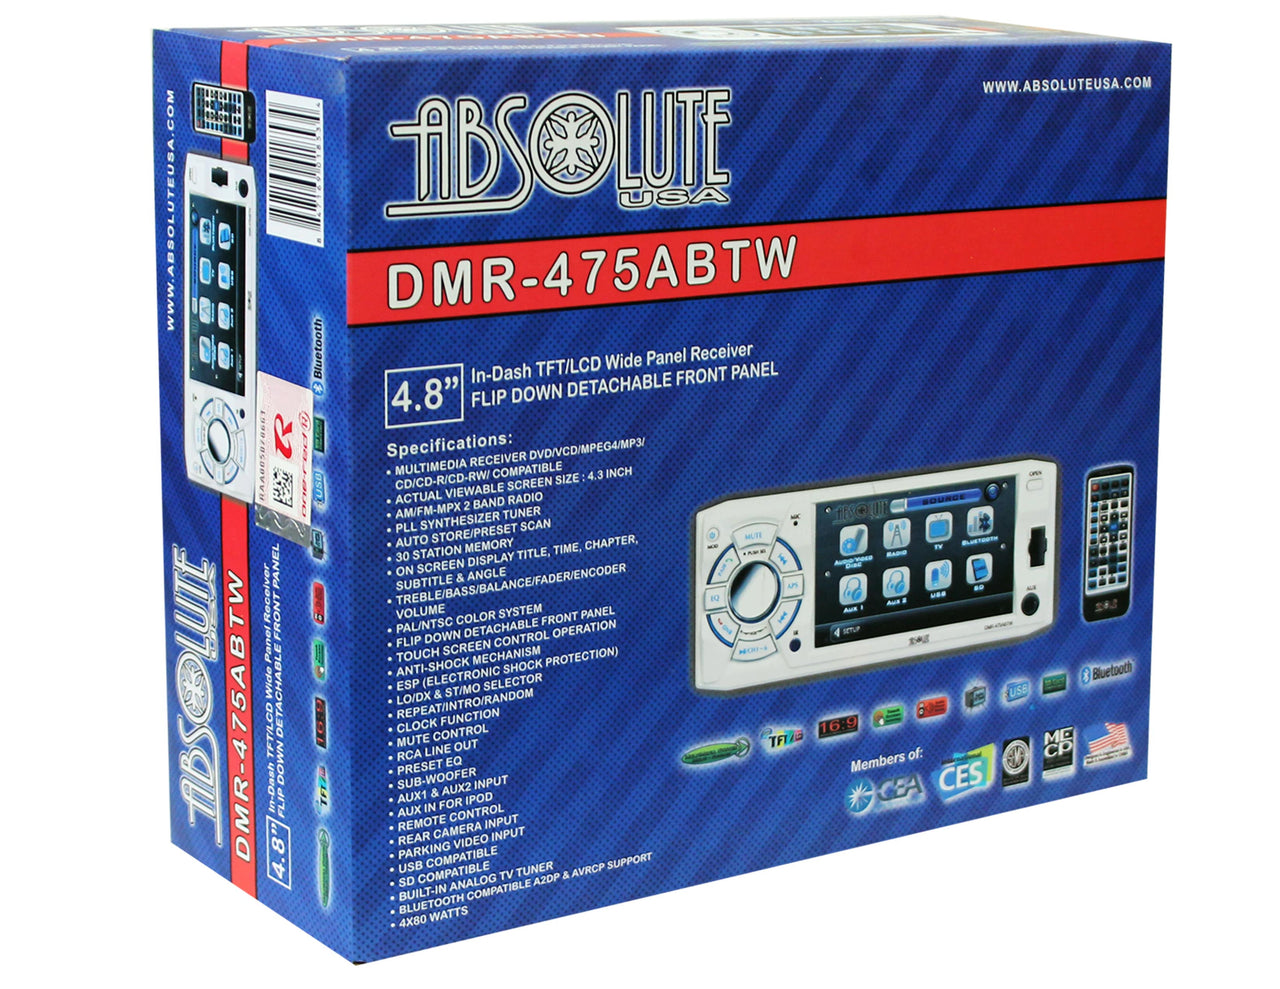 Absolute USA DMR-475ABTW 4.8-Inch DVD/MP3/CD Multimedia Player with USB, SD Card, Built-in Bluetooth